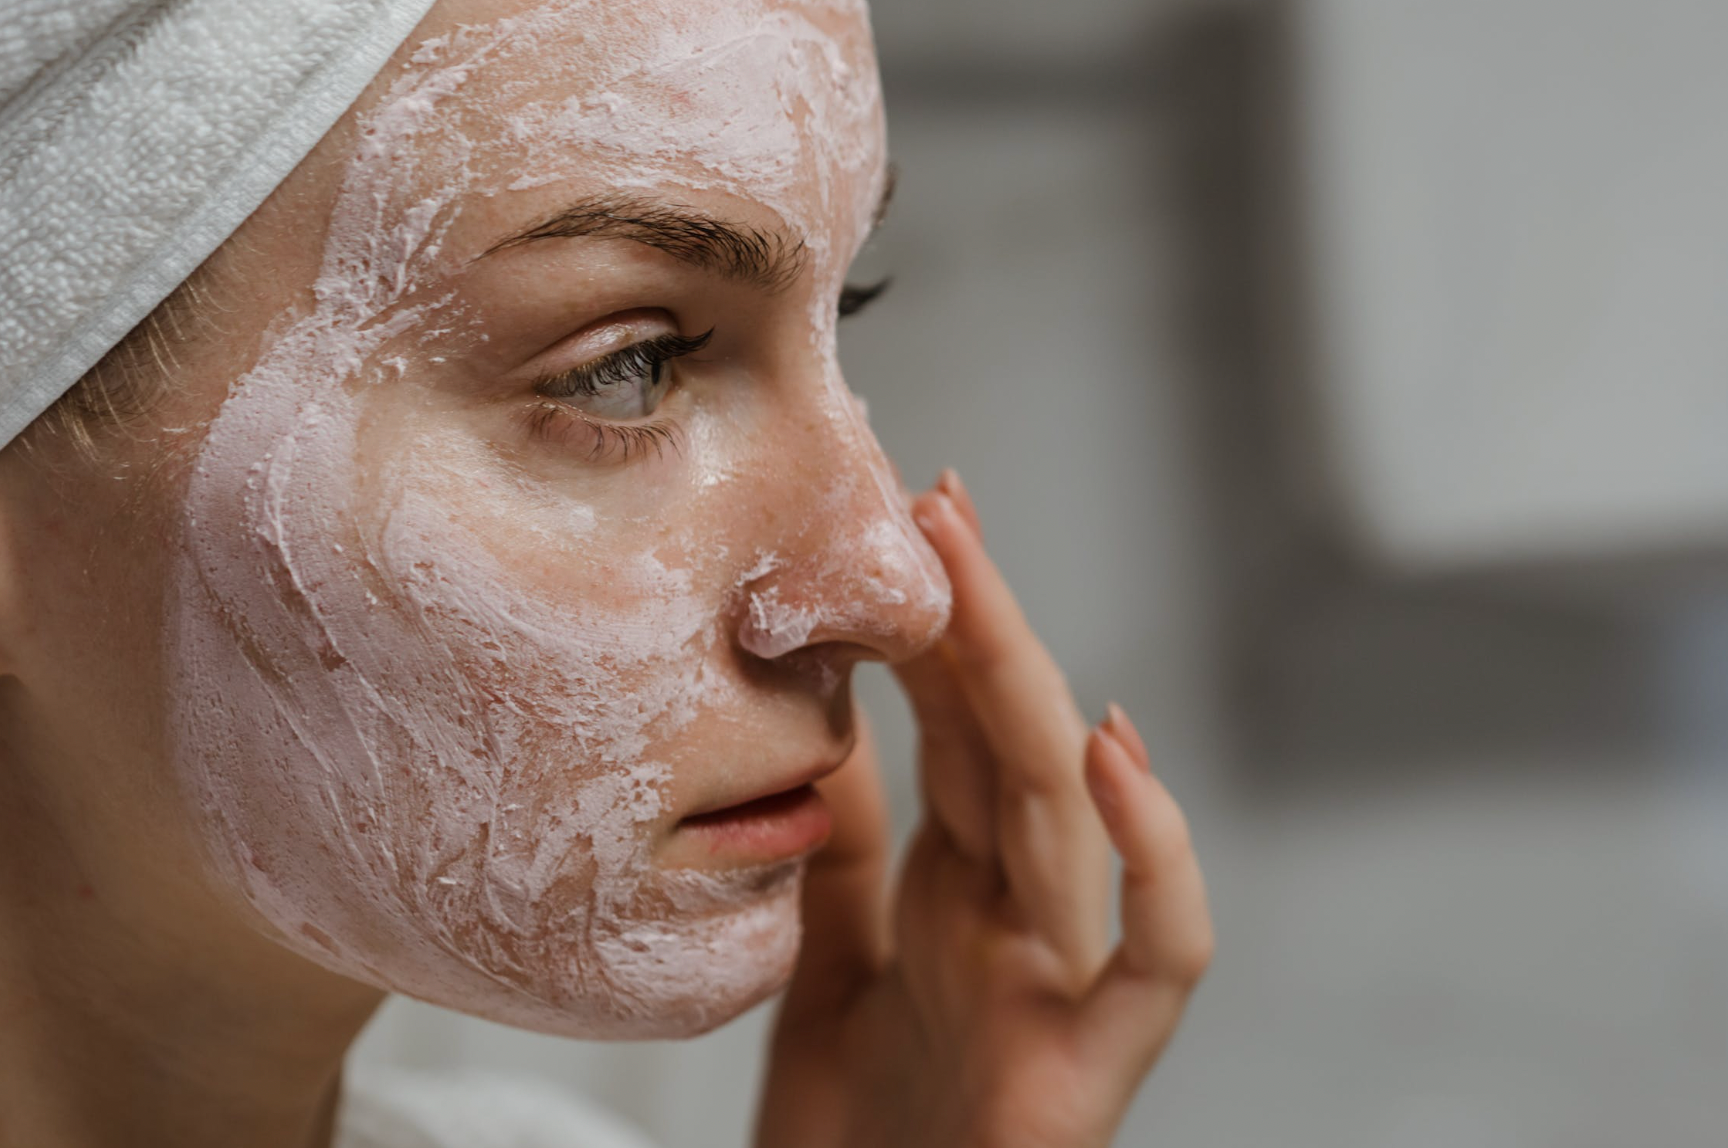 Battling Stubborn Acne: How Nutriskin's LED Mask Can Finally Give You Clear Skin